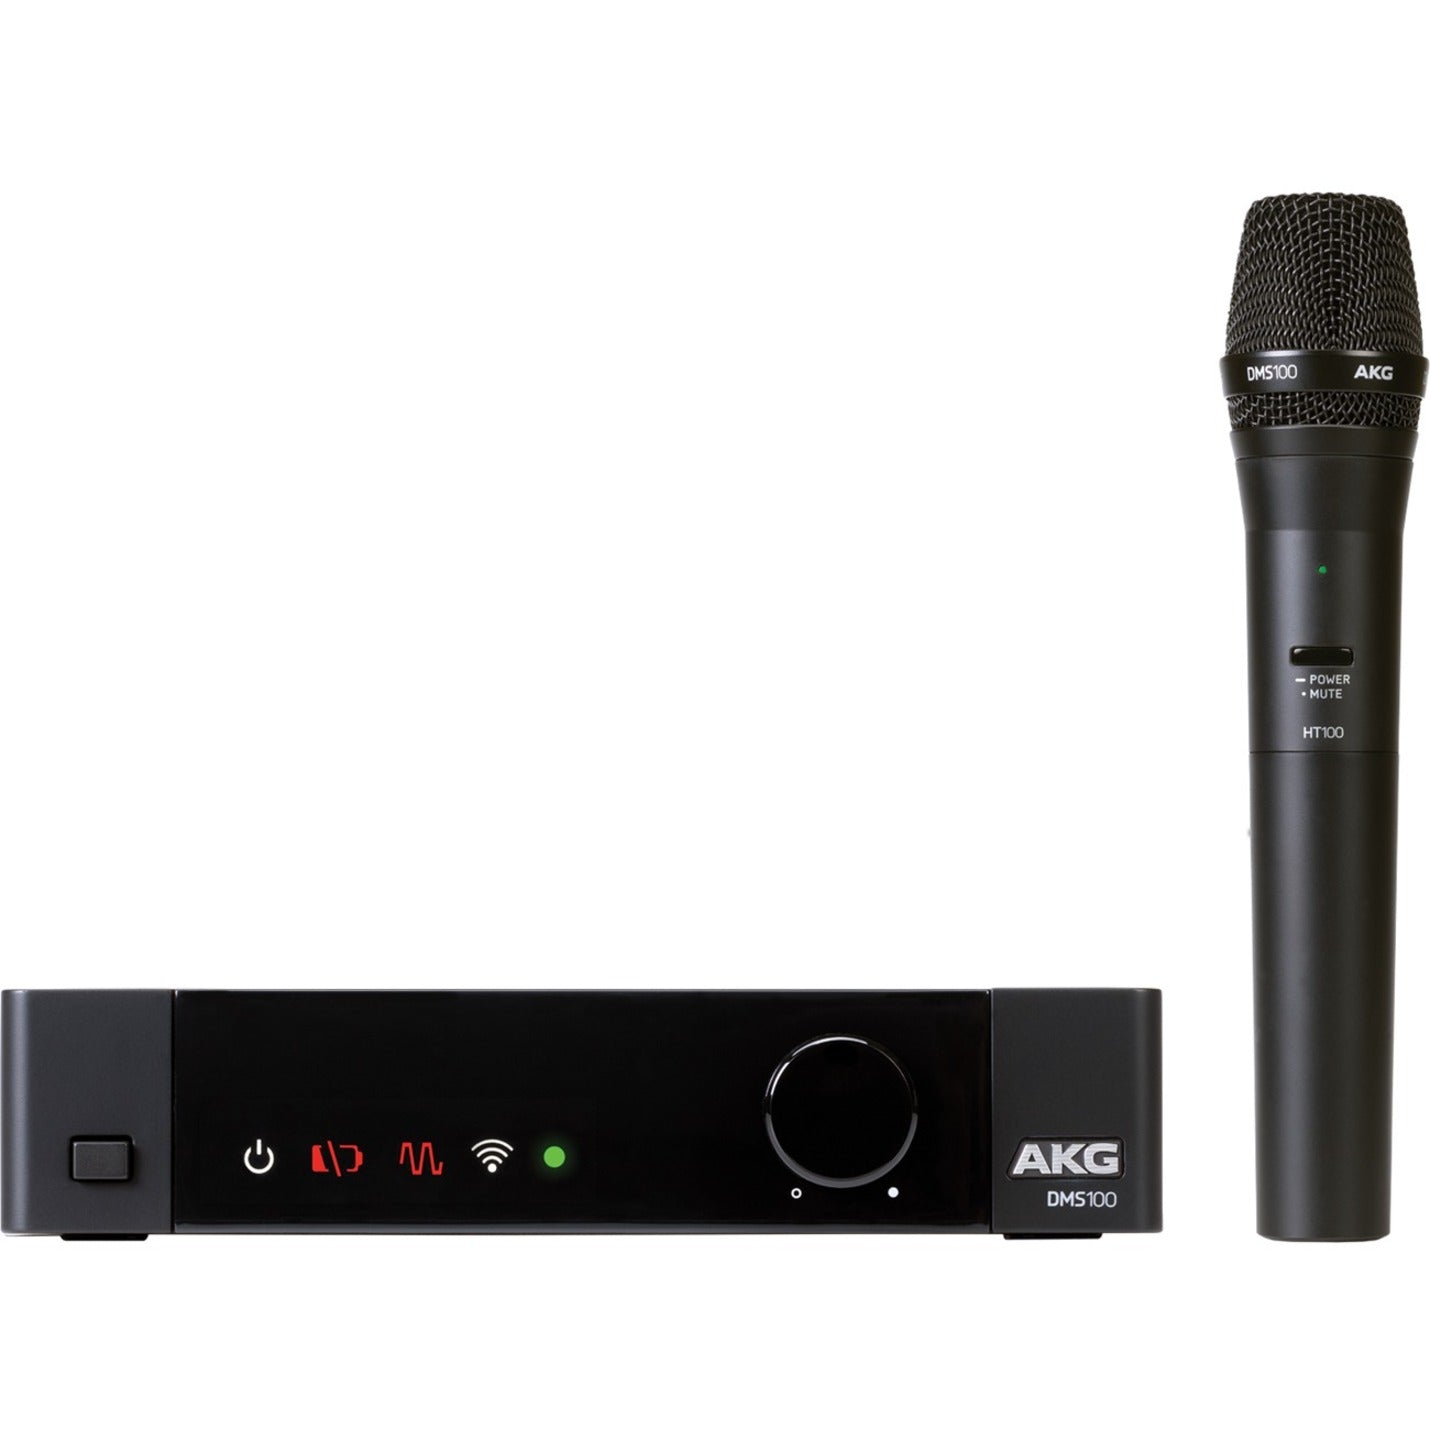 AKG 5100247-00 DMS100 Microphone Set, Wireless Microphone System, 98.43 ft Operating Range, 20 kHz Maximum Frequency Response, 70 Hz Minimum Frequency Response, 2.40 GHz Maximum Operating Frequency, 90 dB(A) Signal to Noise Ratio (SNR A-Weighted)